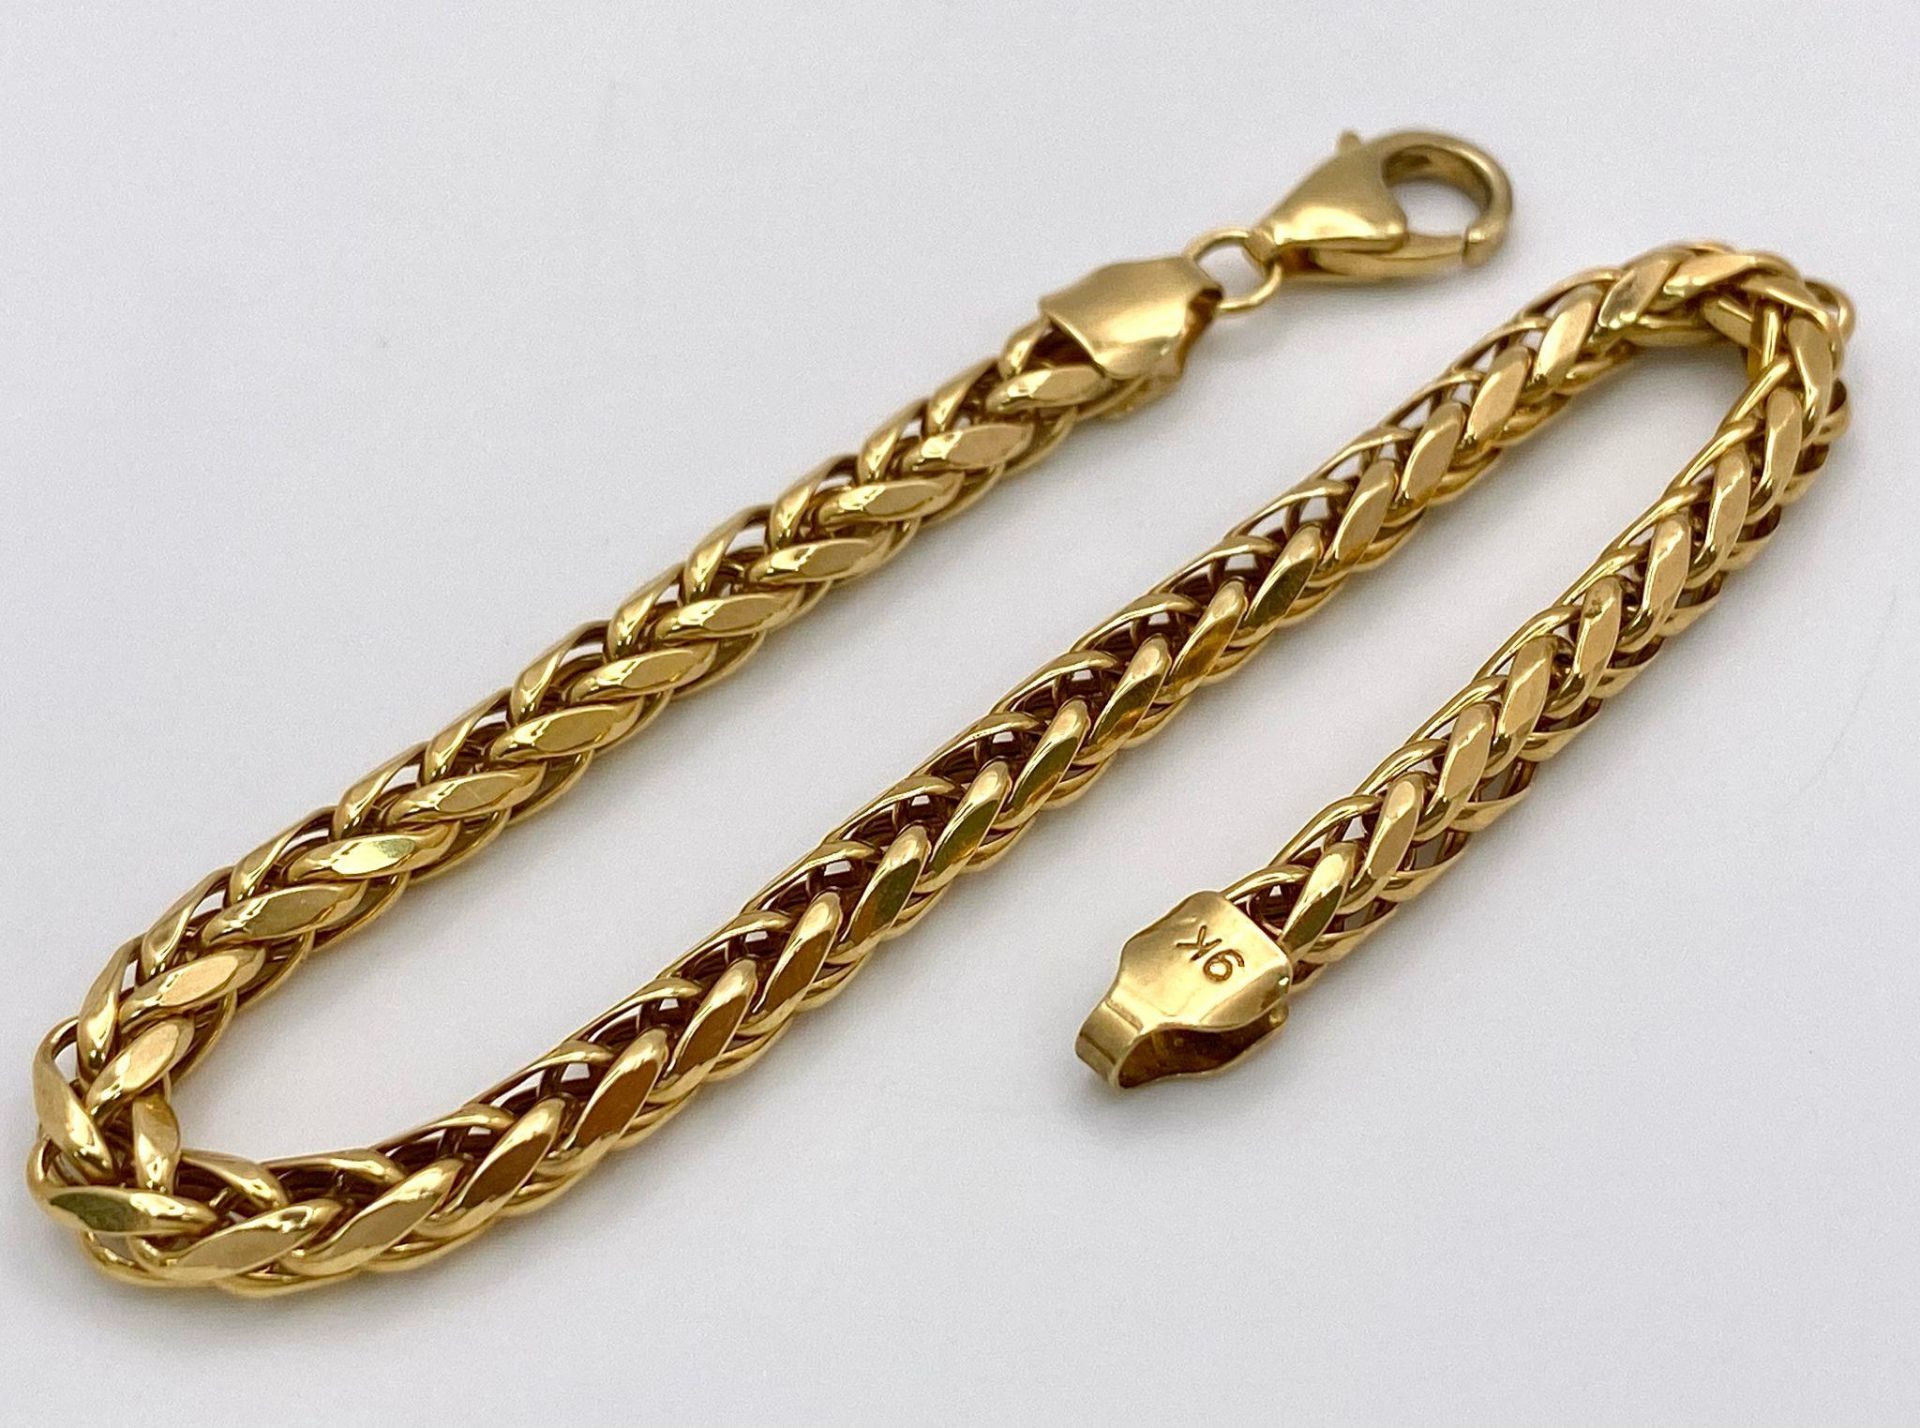 A 9K Yellow Gold Intricate Link Bracelet. 18cm. 5g weight. - Image 2 of 6